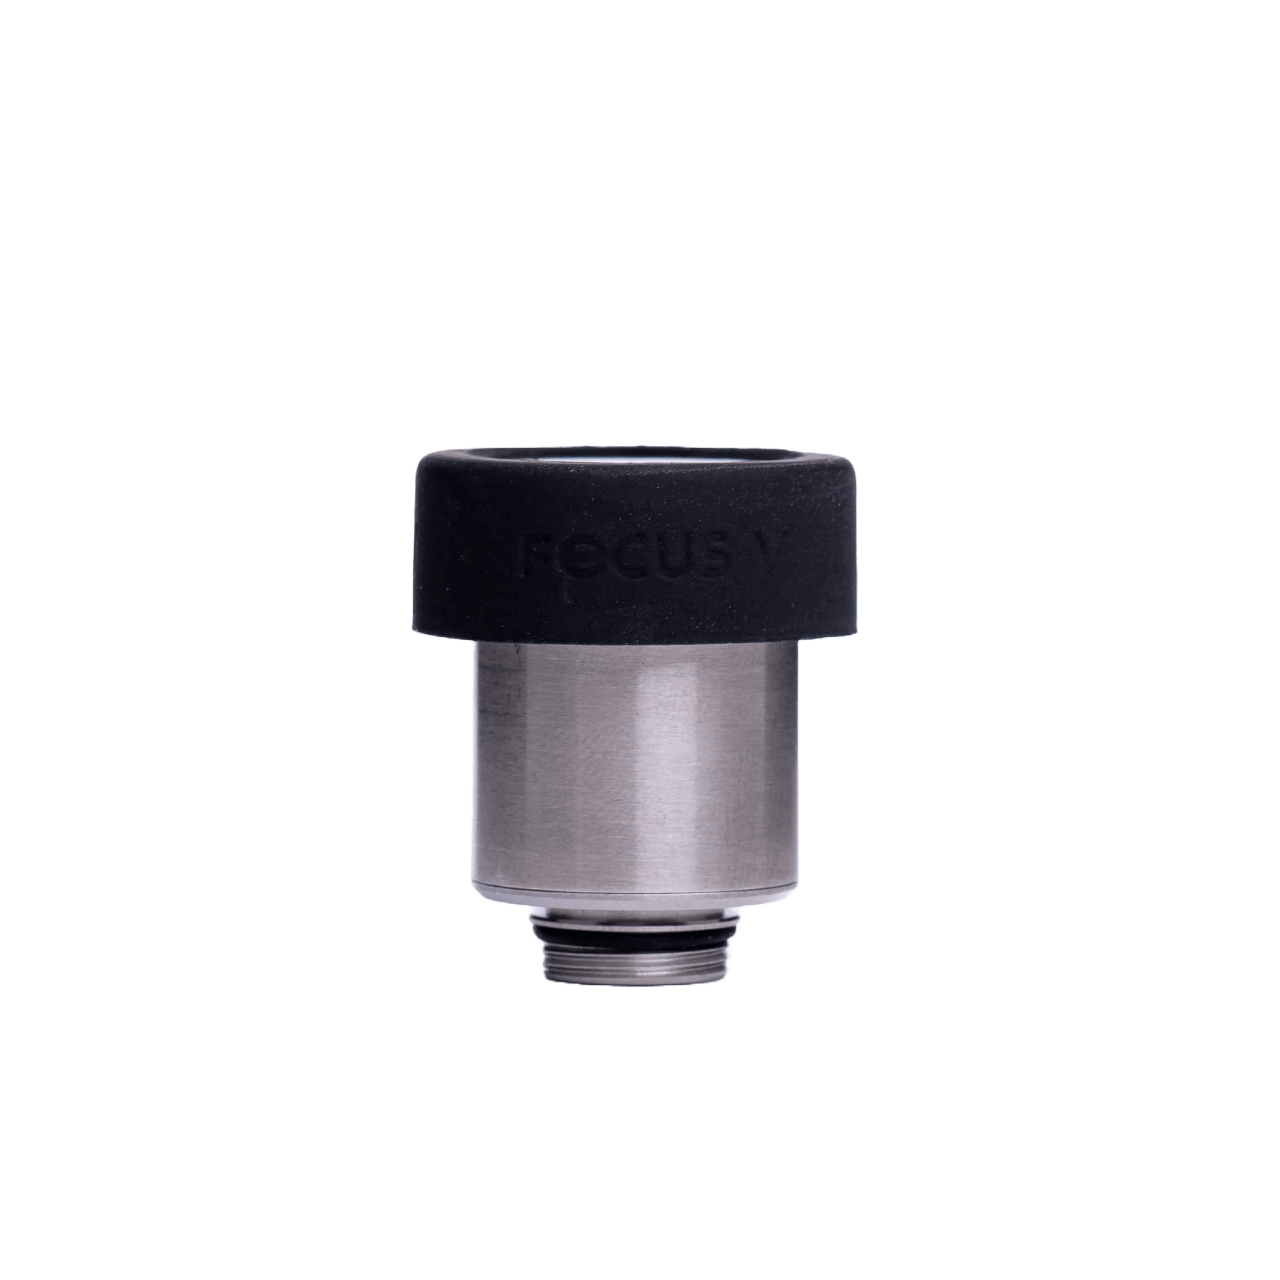 Focus V CARTA 2 Intelli-Core™ Atomizer For Herb: A Revolutionary Vaping  Experience